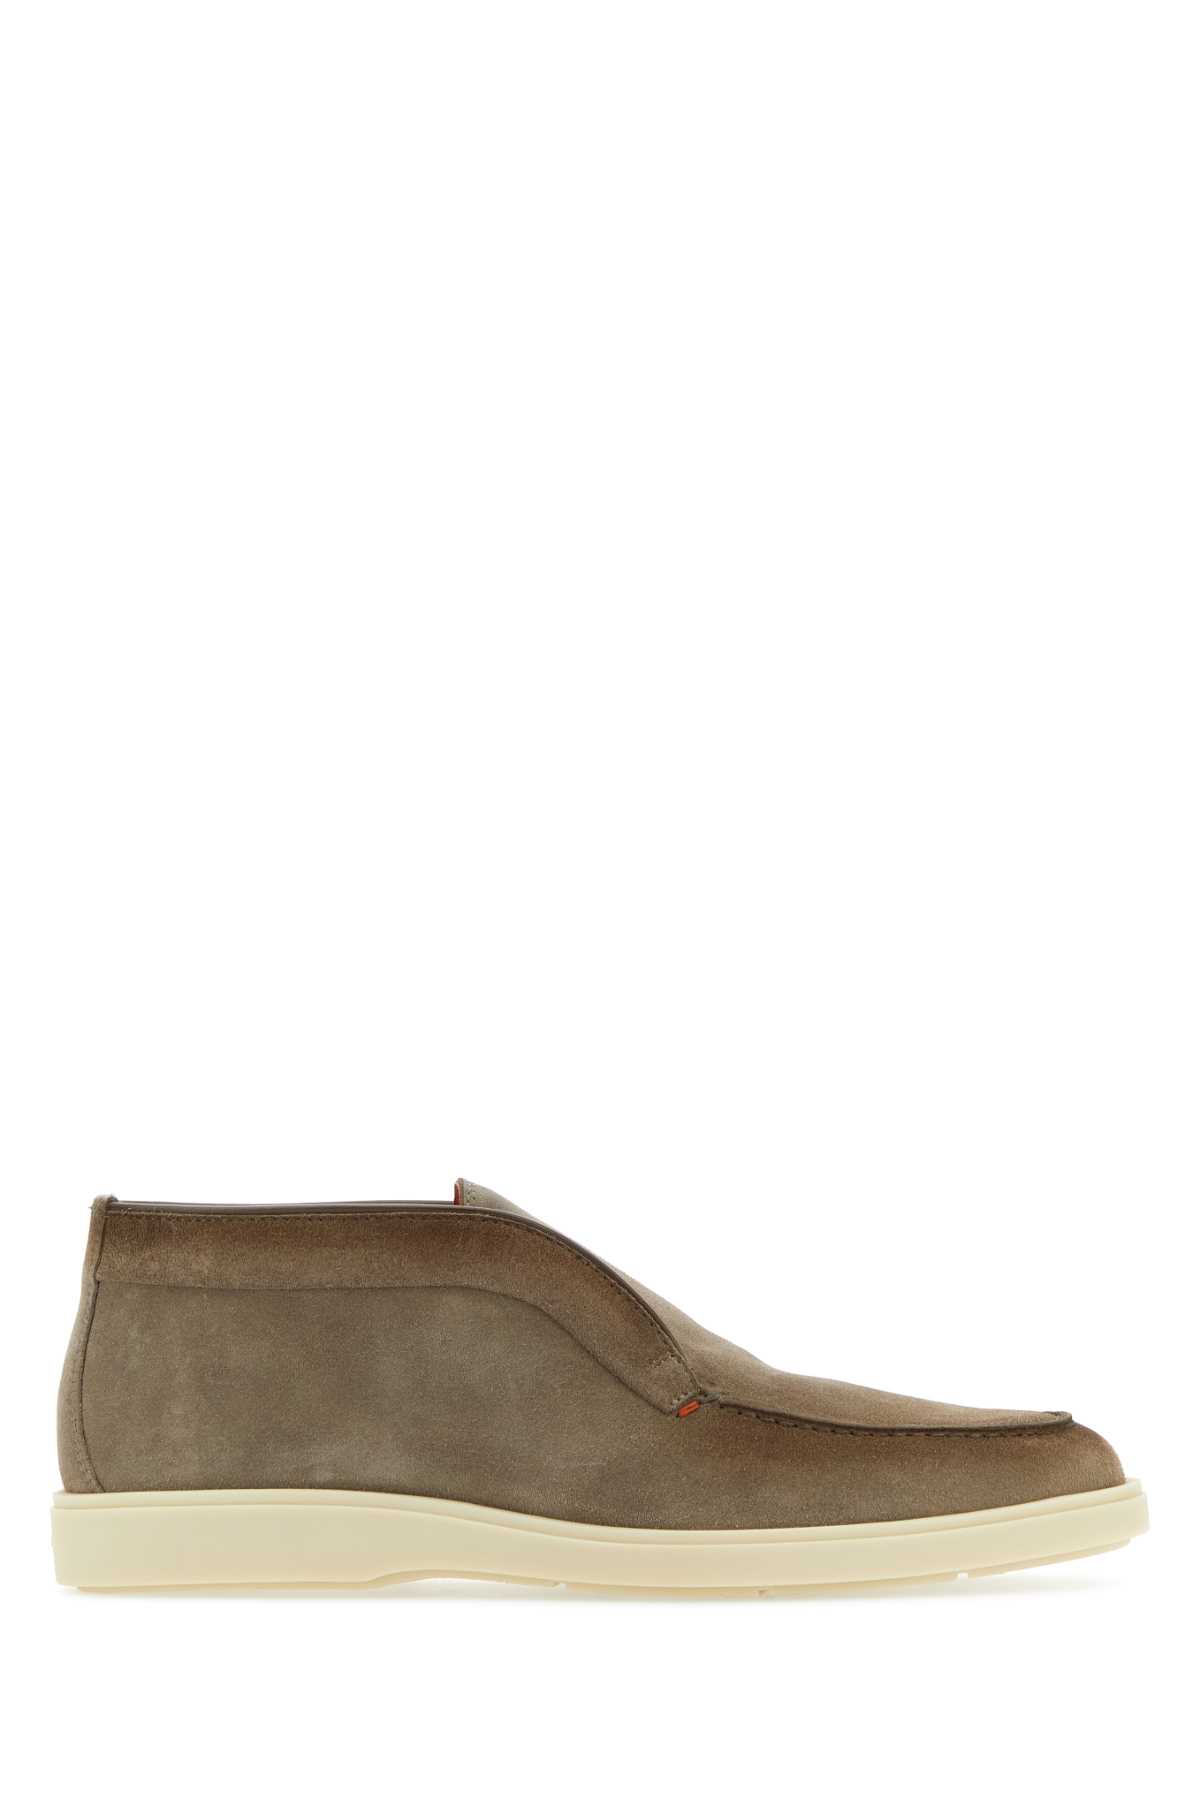 Dove Grey Suede Ankle Boots